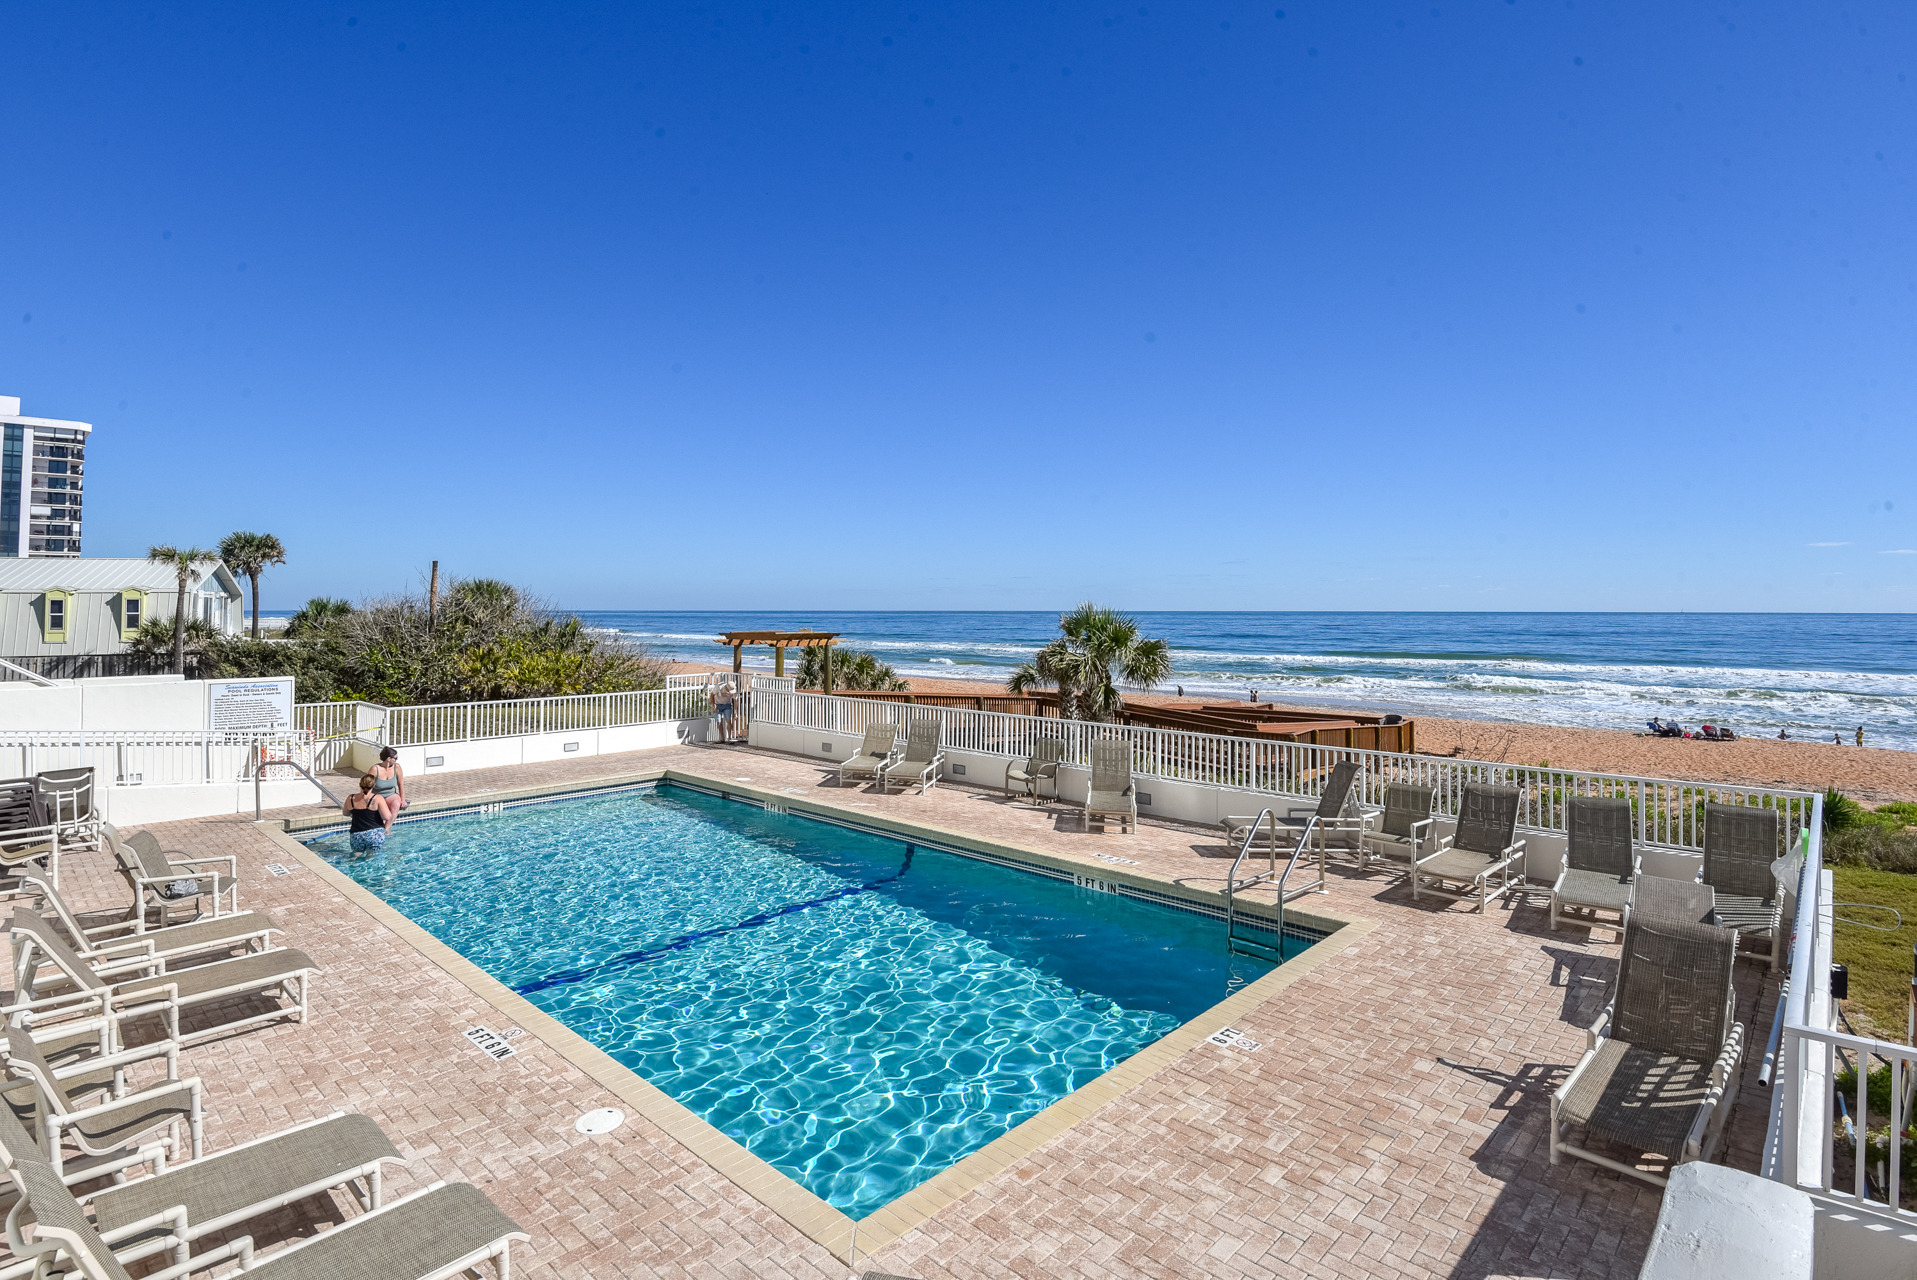 Oceanfront heated pool with furniture